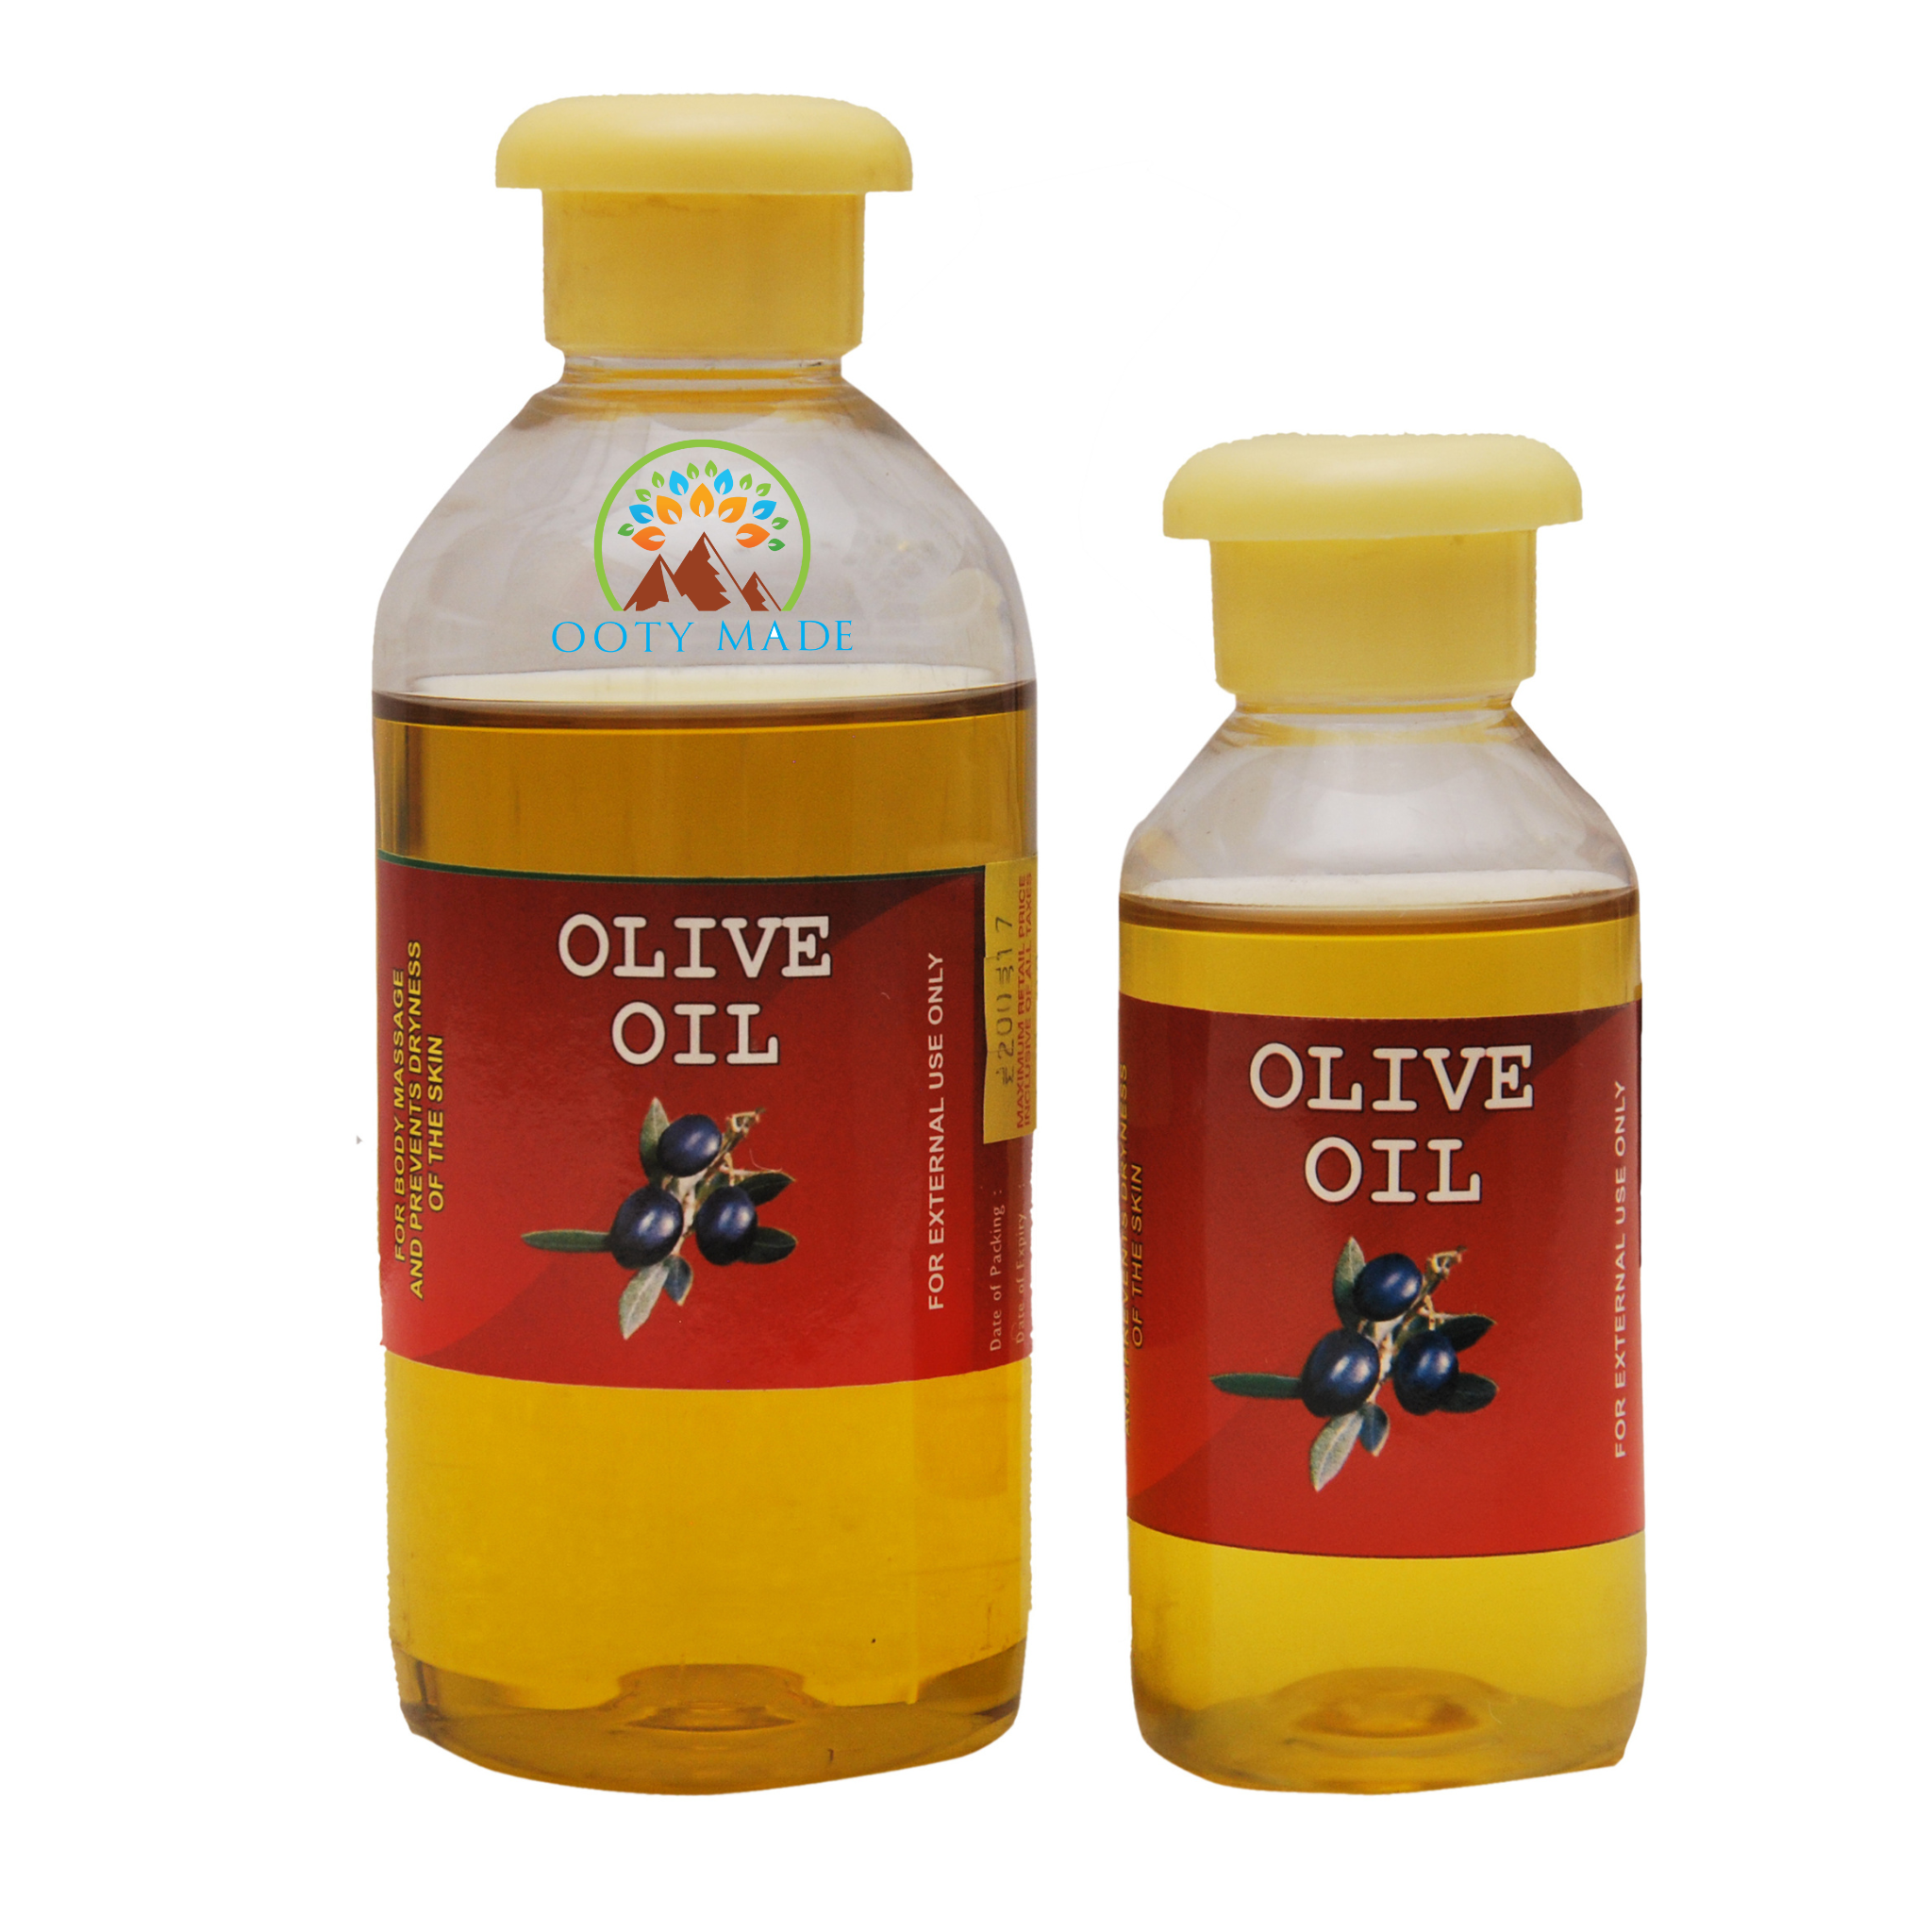 Pure Natural Olive Oil for Skin OotyMade.com